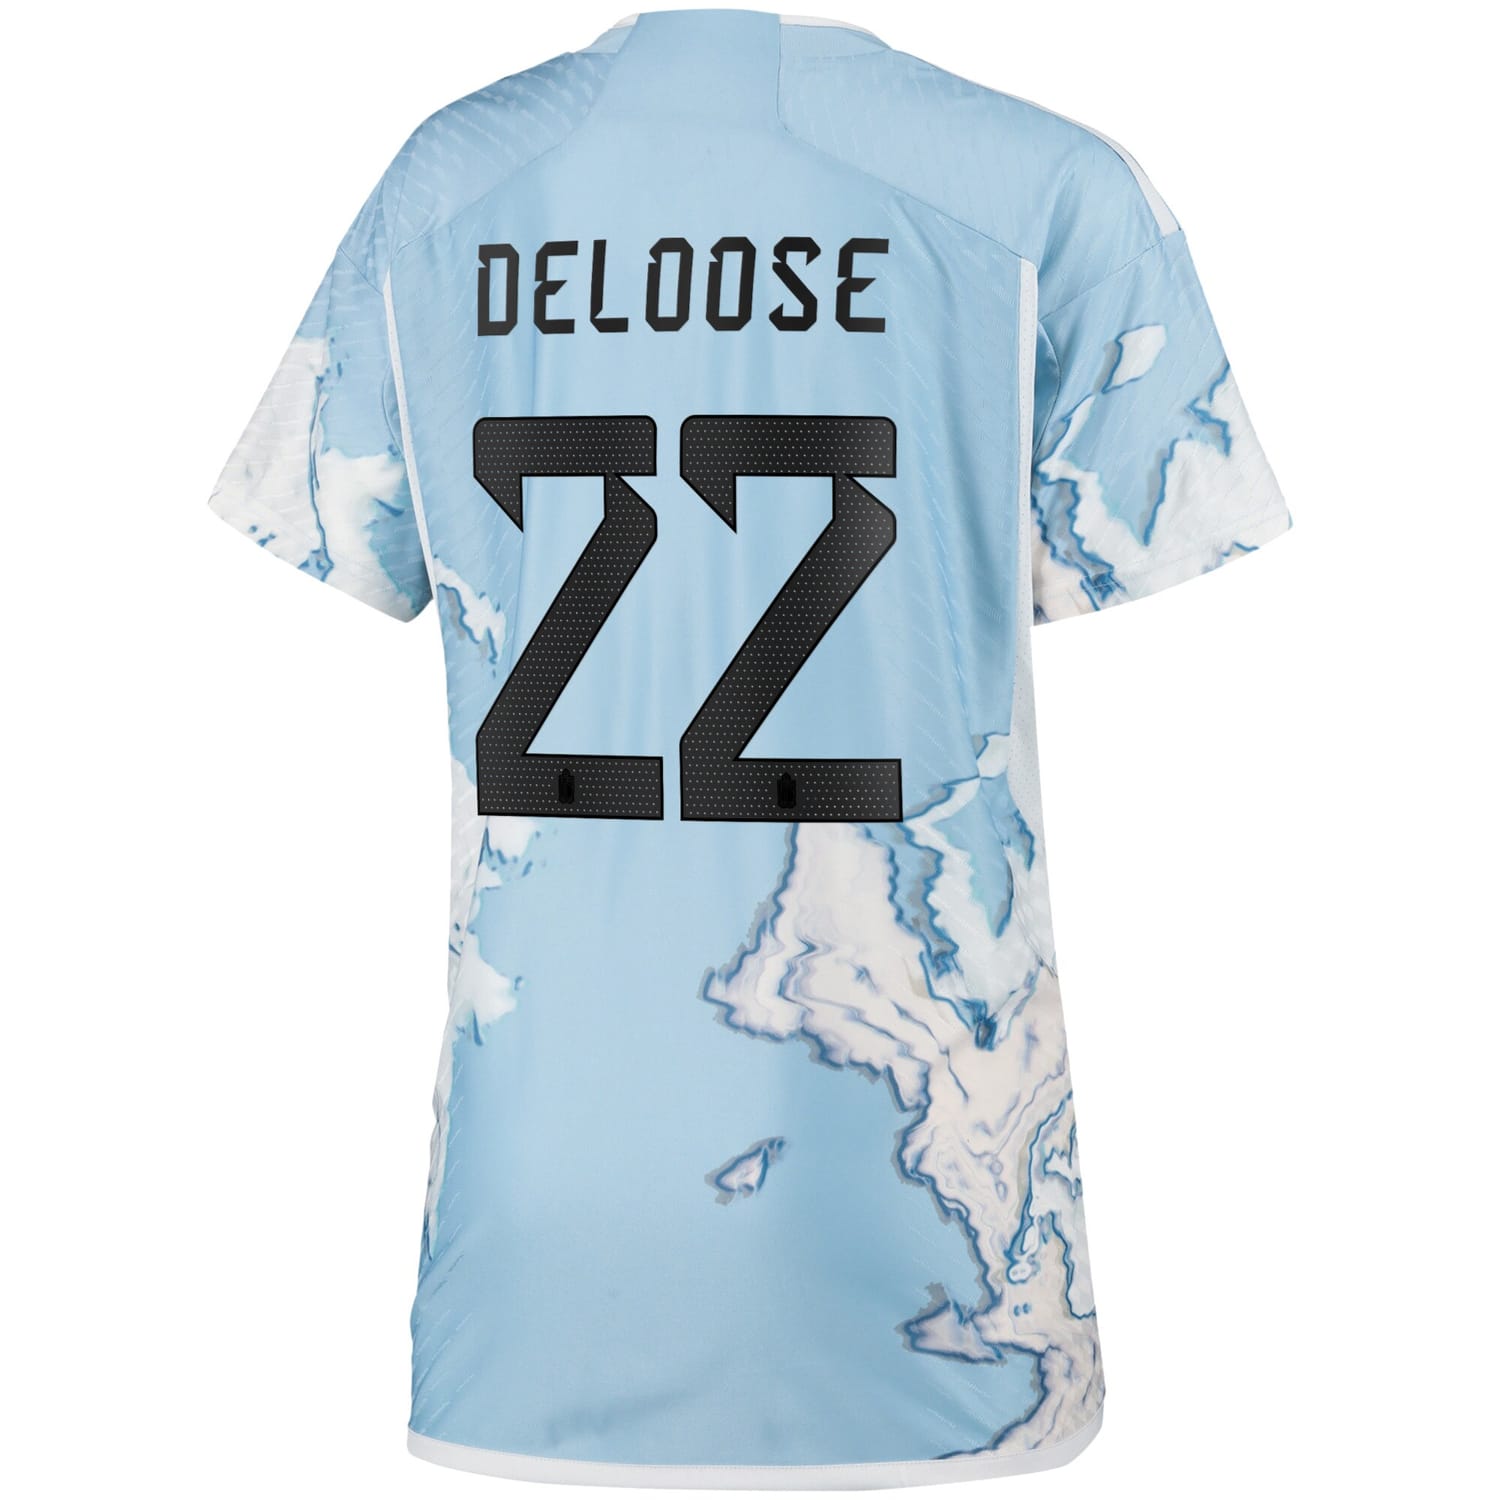 Belgium National Team Away Authentic Jersey Shirt 2023 player Laura Deloose 22 printing for Women